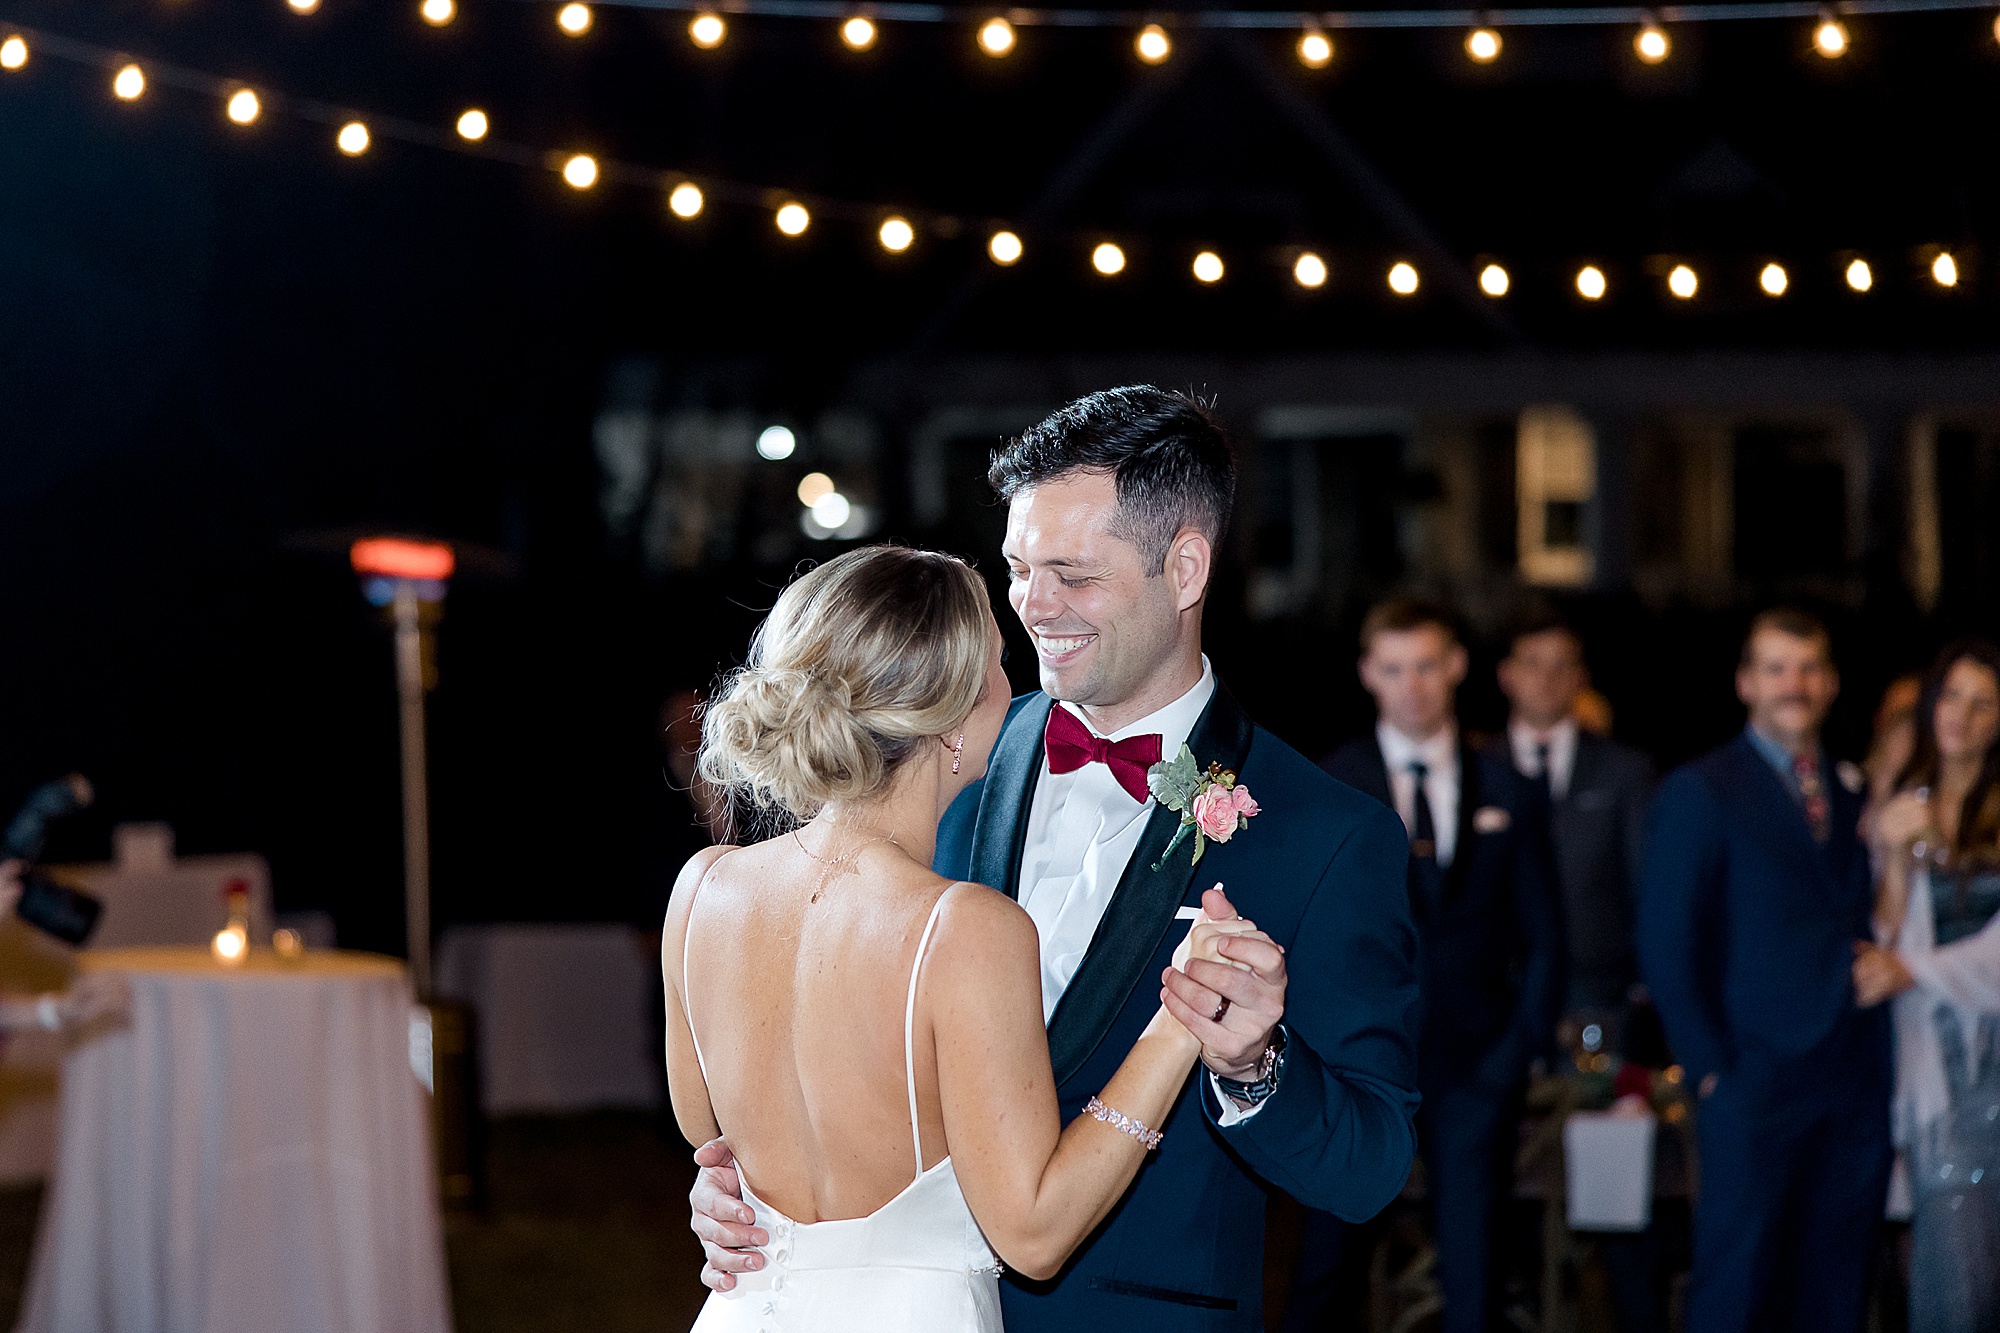 bride and groom share first dance at wedding reception